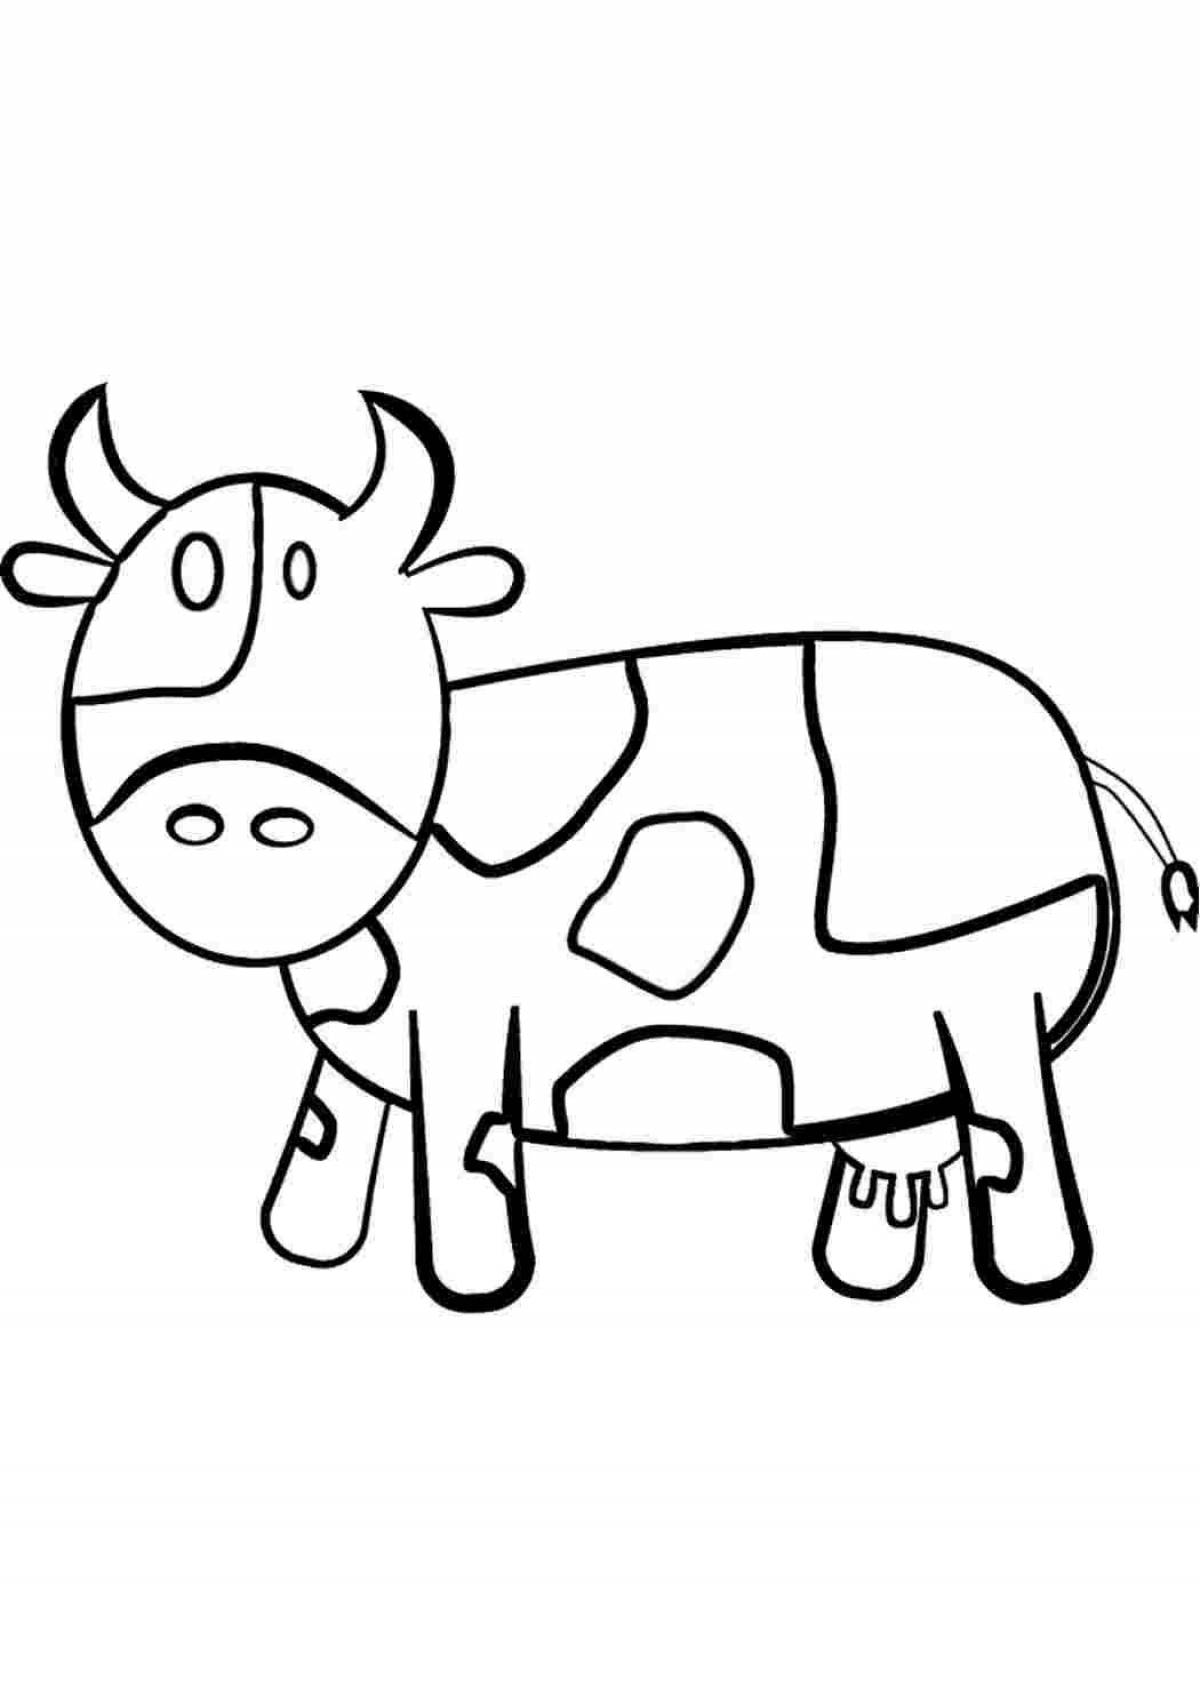 Coloring page gorgeous cow for children 5-6 years old